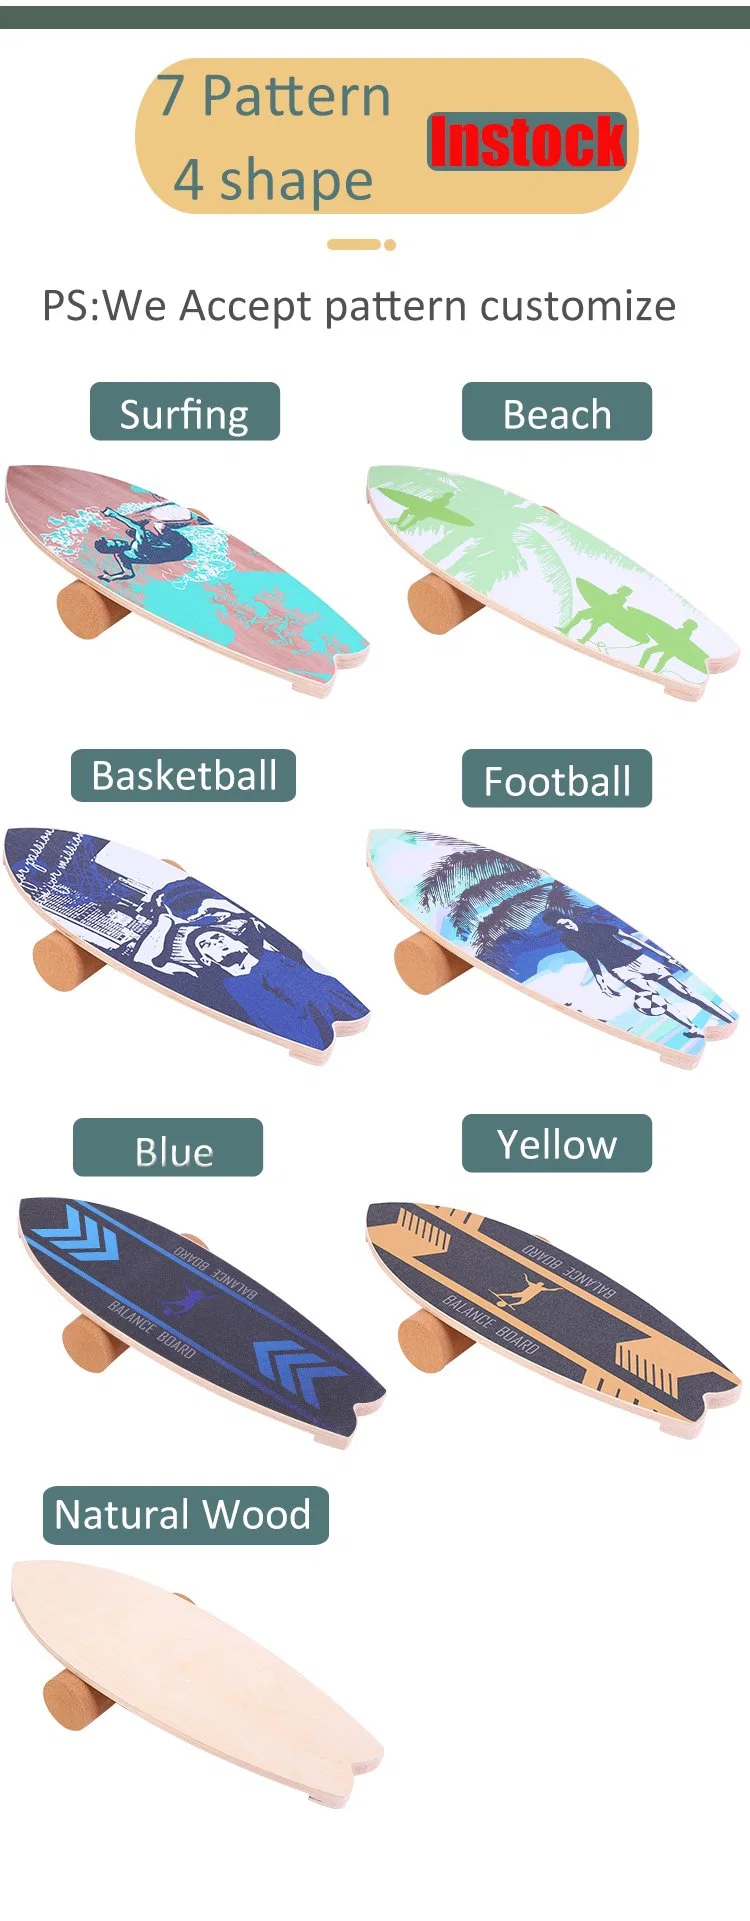 Wood Balance Board Trainer, Wooden Balancing Board to Exercise and Build Core Stability, Wobble Board for Skateboard, Hockey, Snowboard &amp; Surf Training